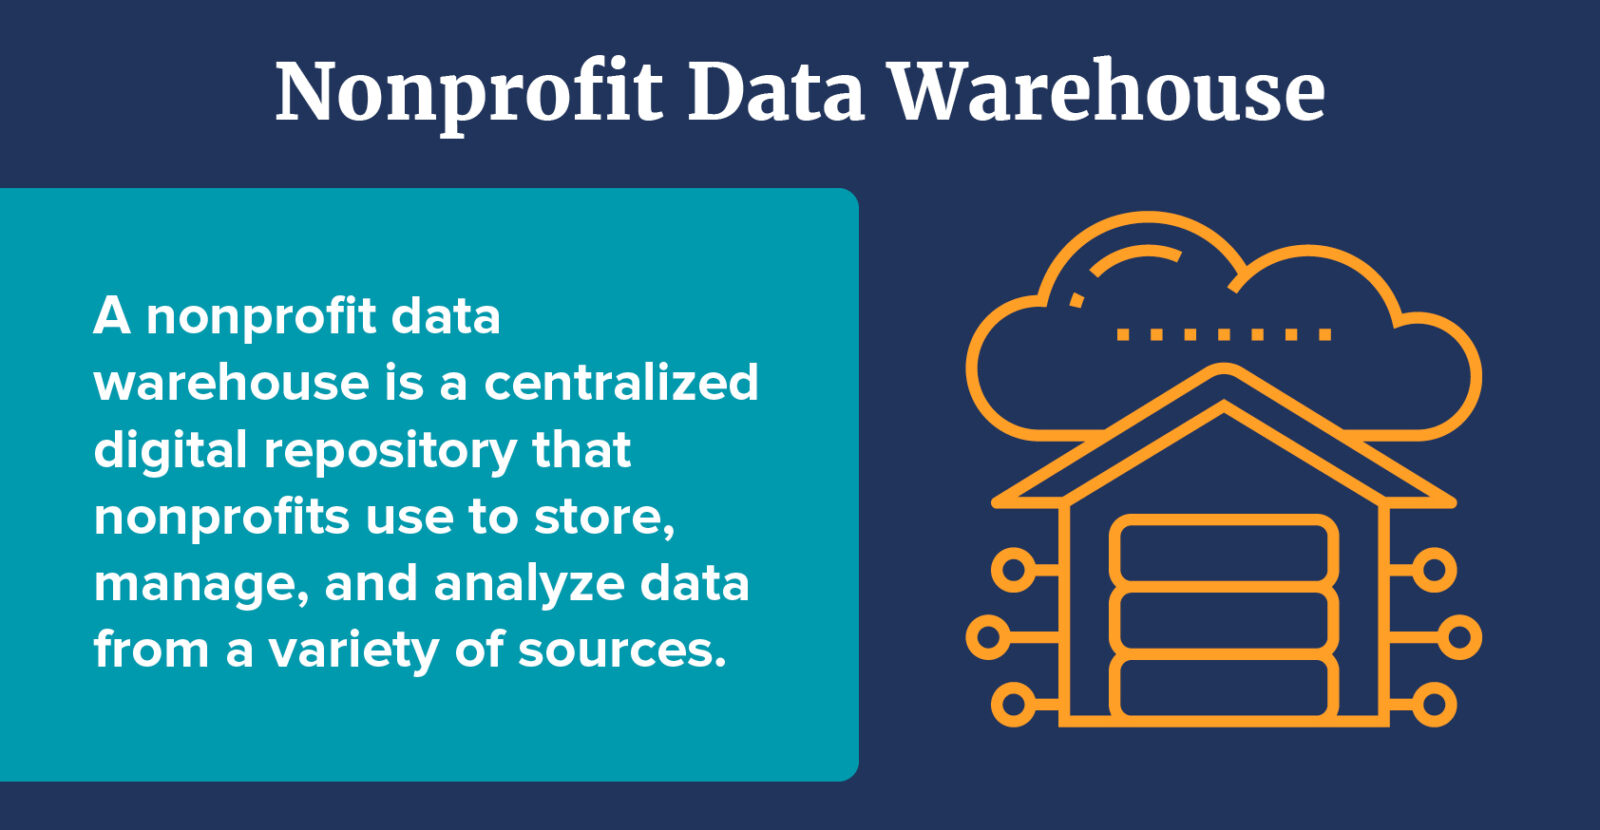 Definition of nonprofit data warehouse, which is explained in the text below